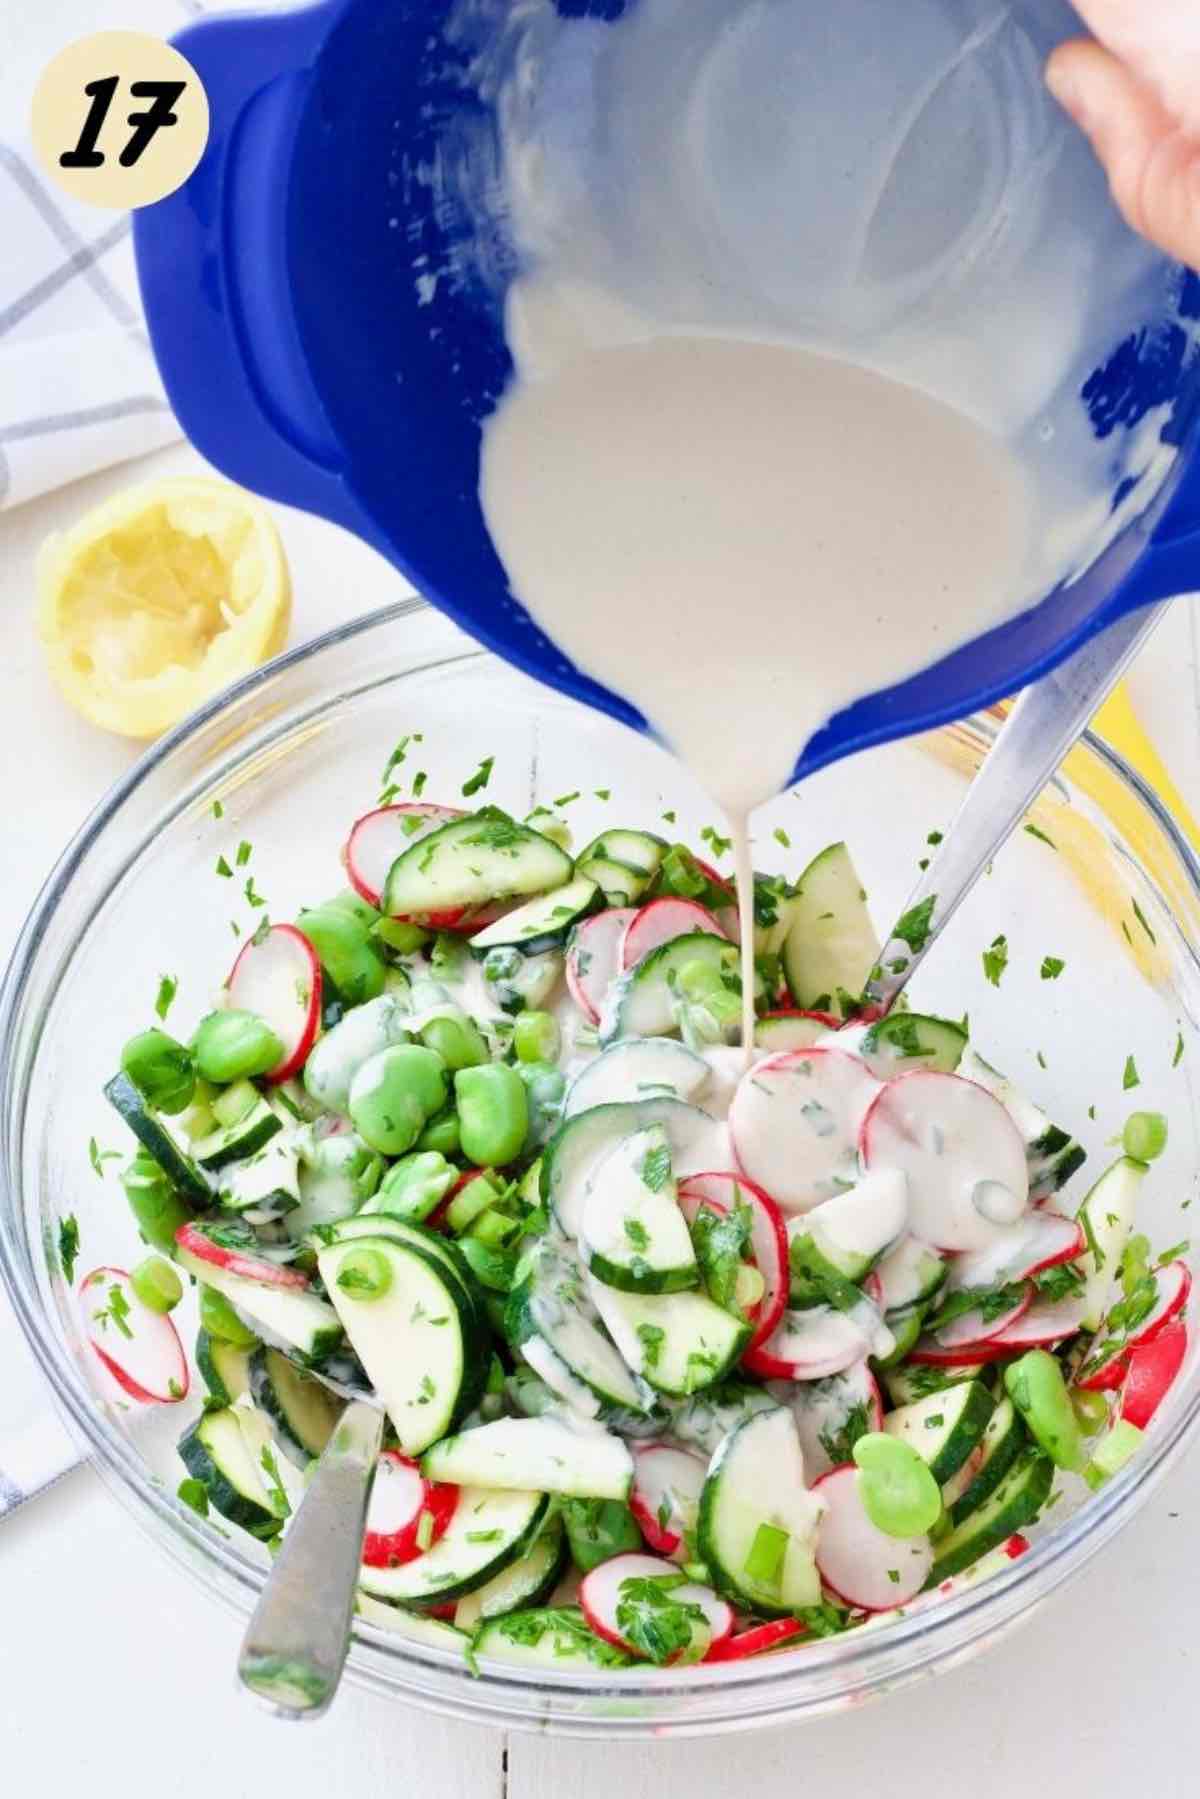 Pouring tahini dressing over the salad.